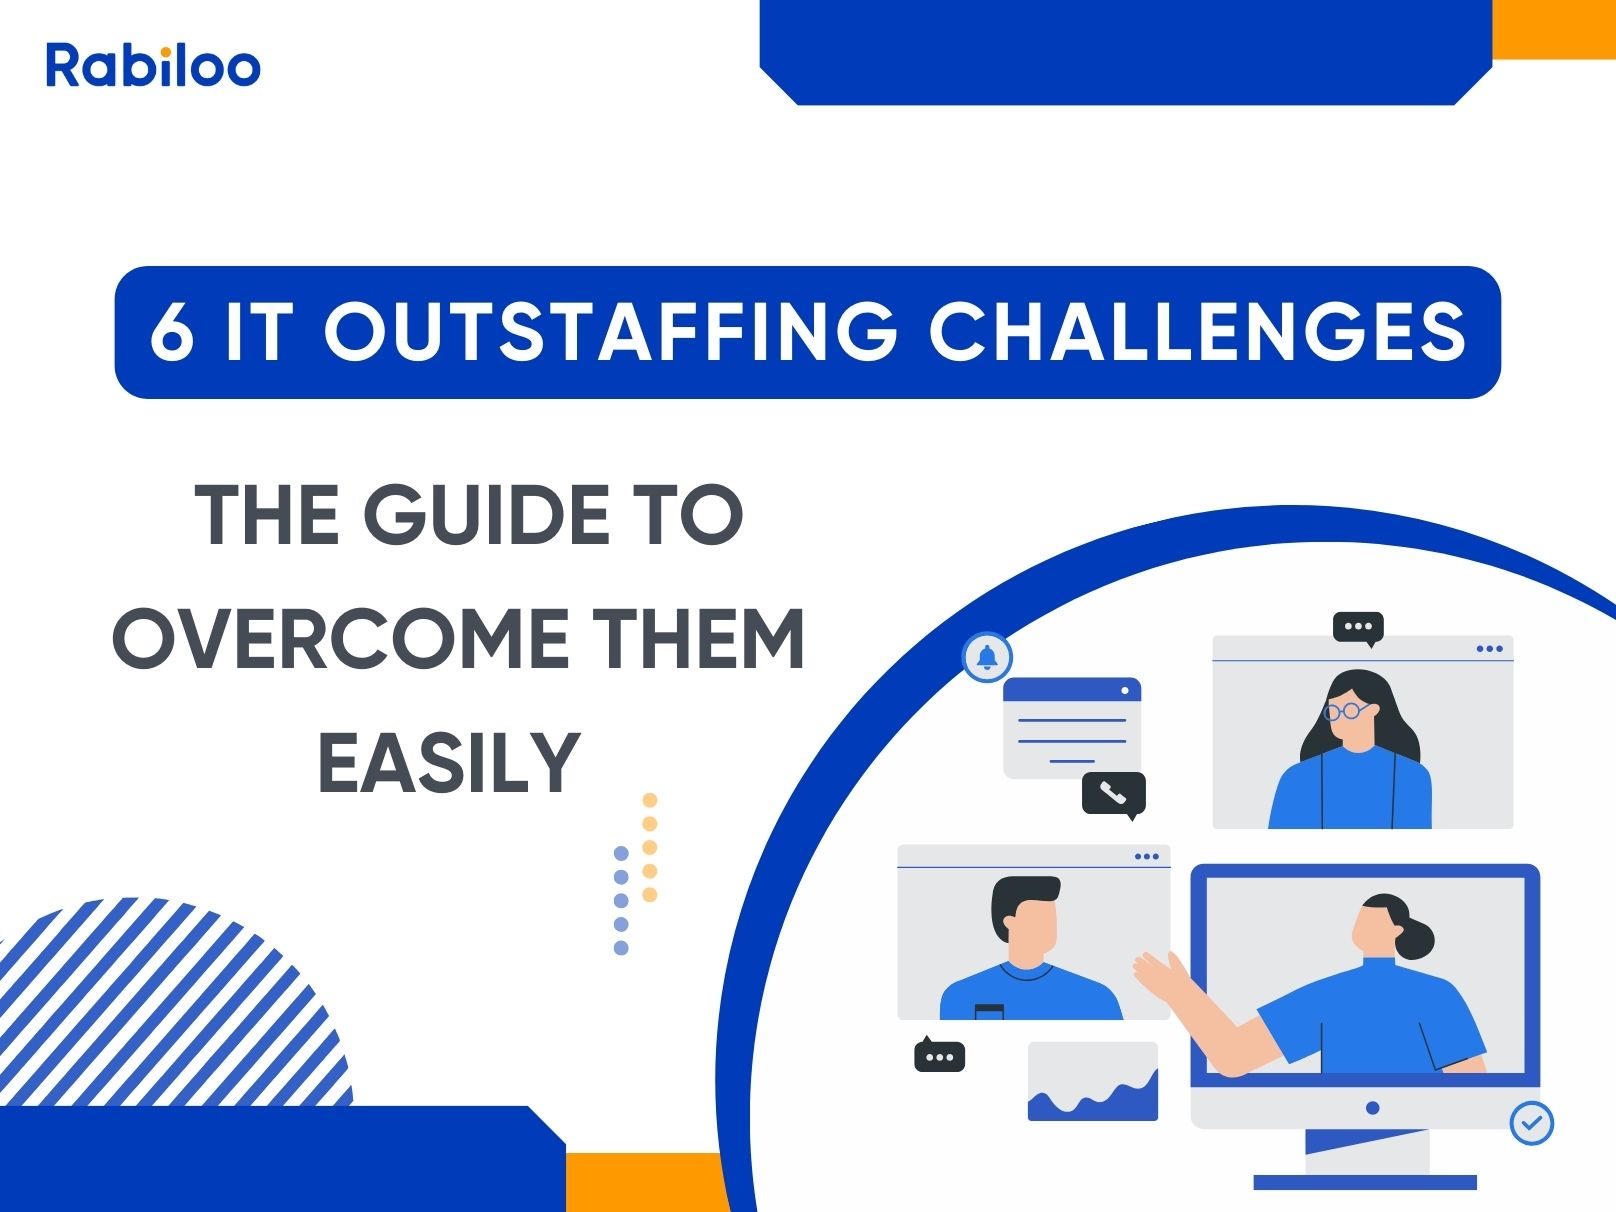 6 IT Outstaffing challenges and the guide to overcome them easily